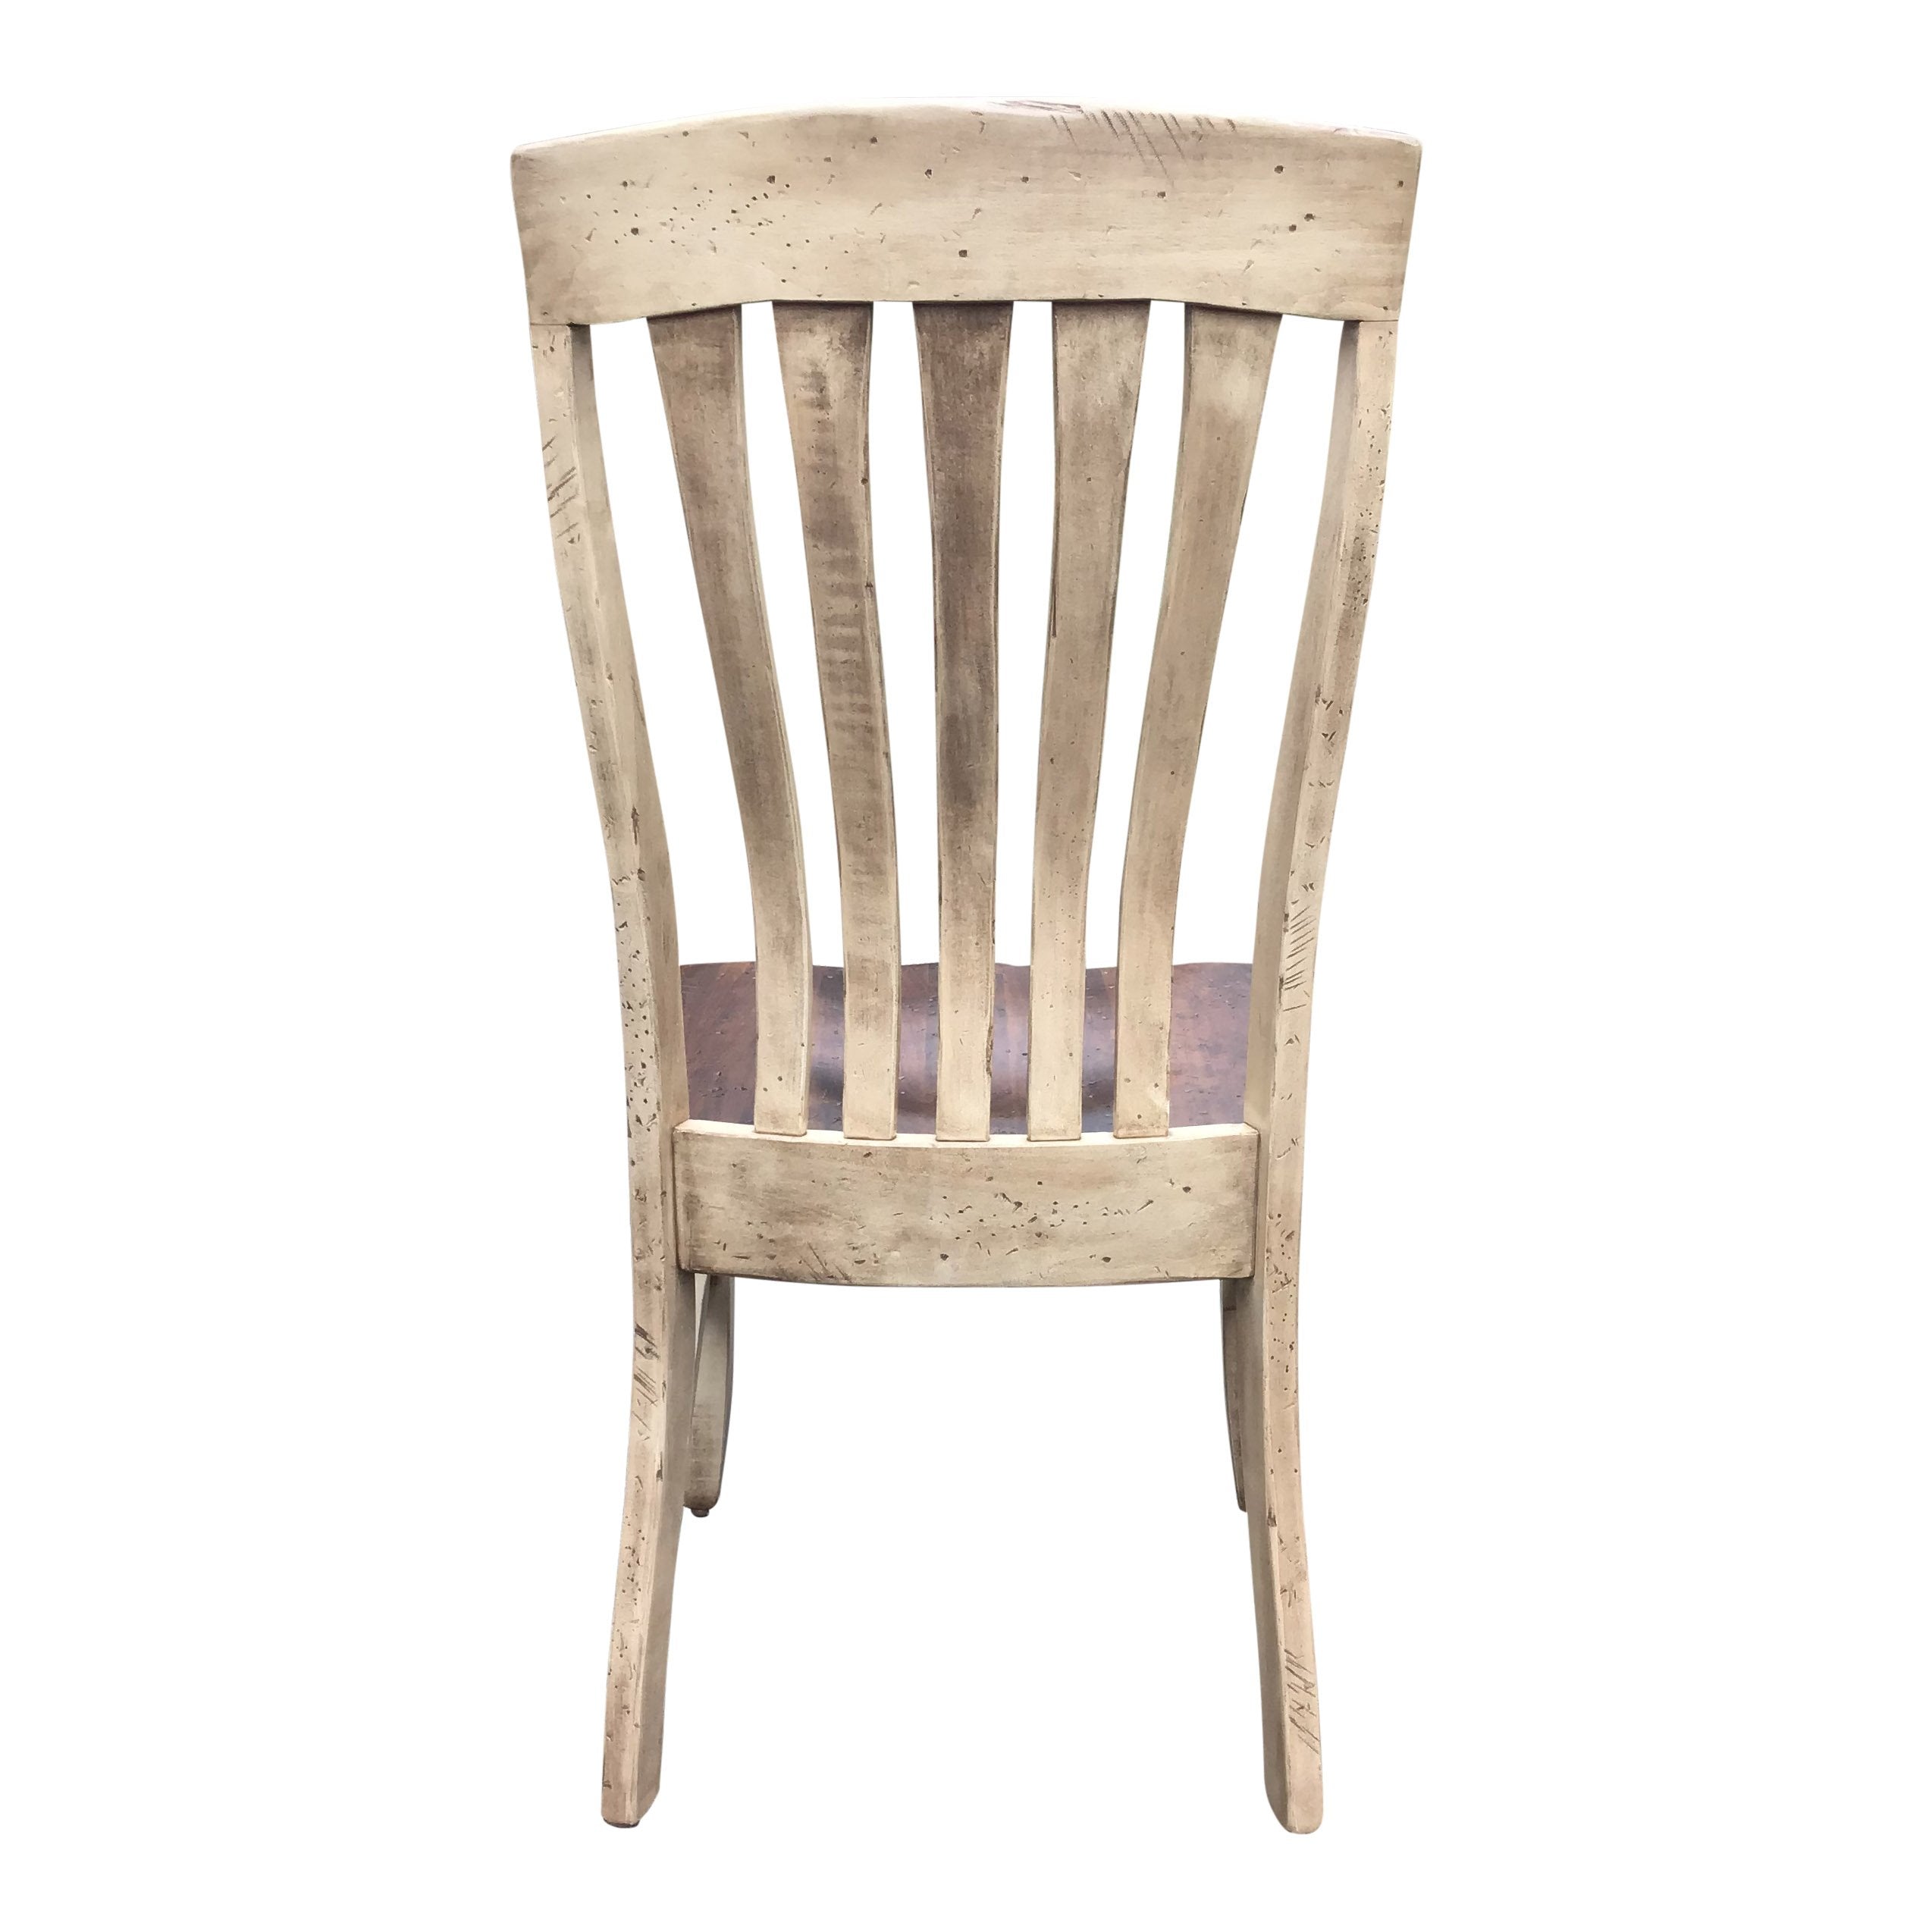 Richland Signature Series side chair